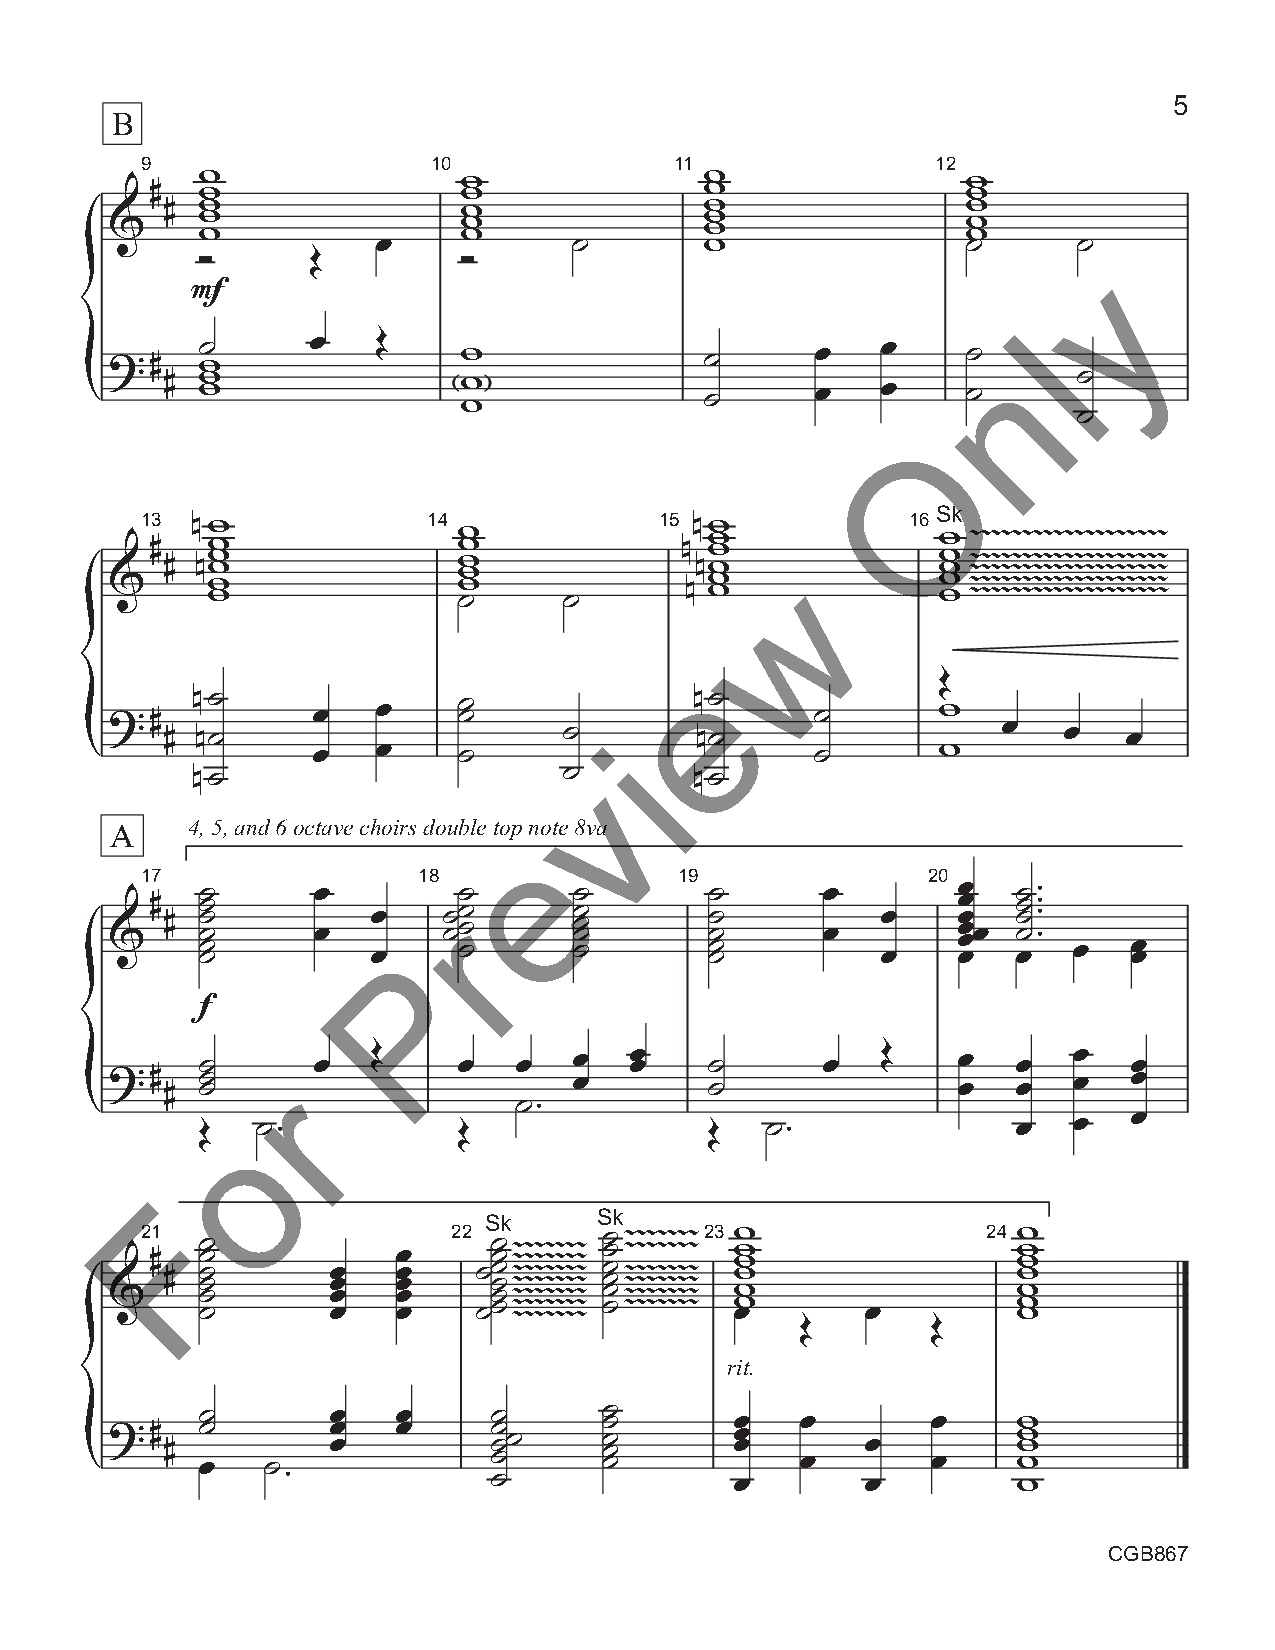 Suite Praise 2-5 Octaves, With Opt. C-Sharp 8, D8